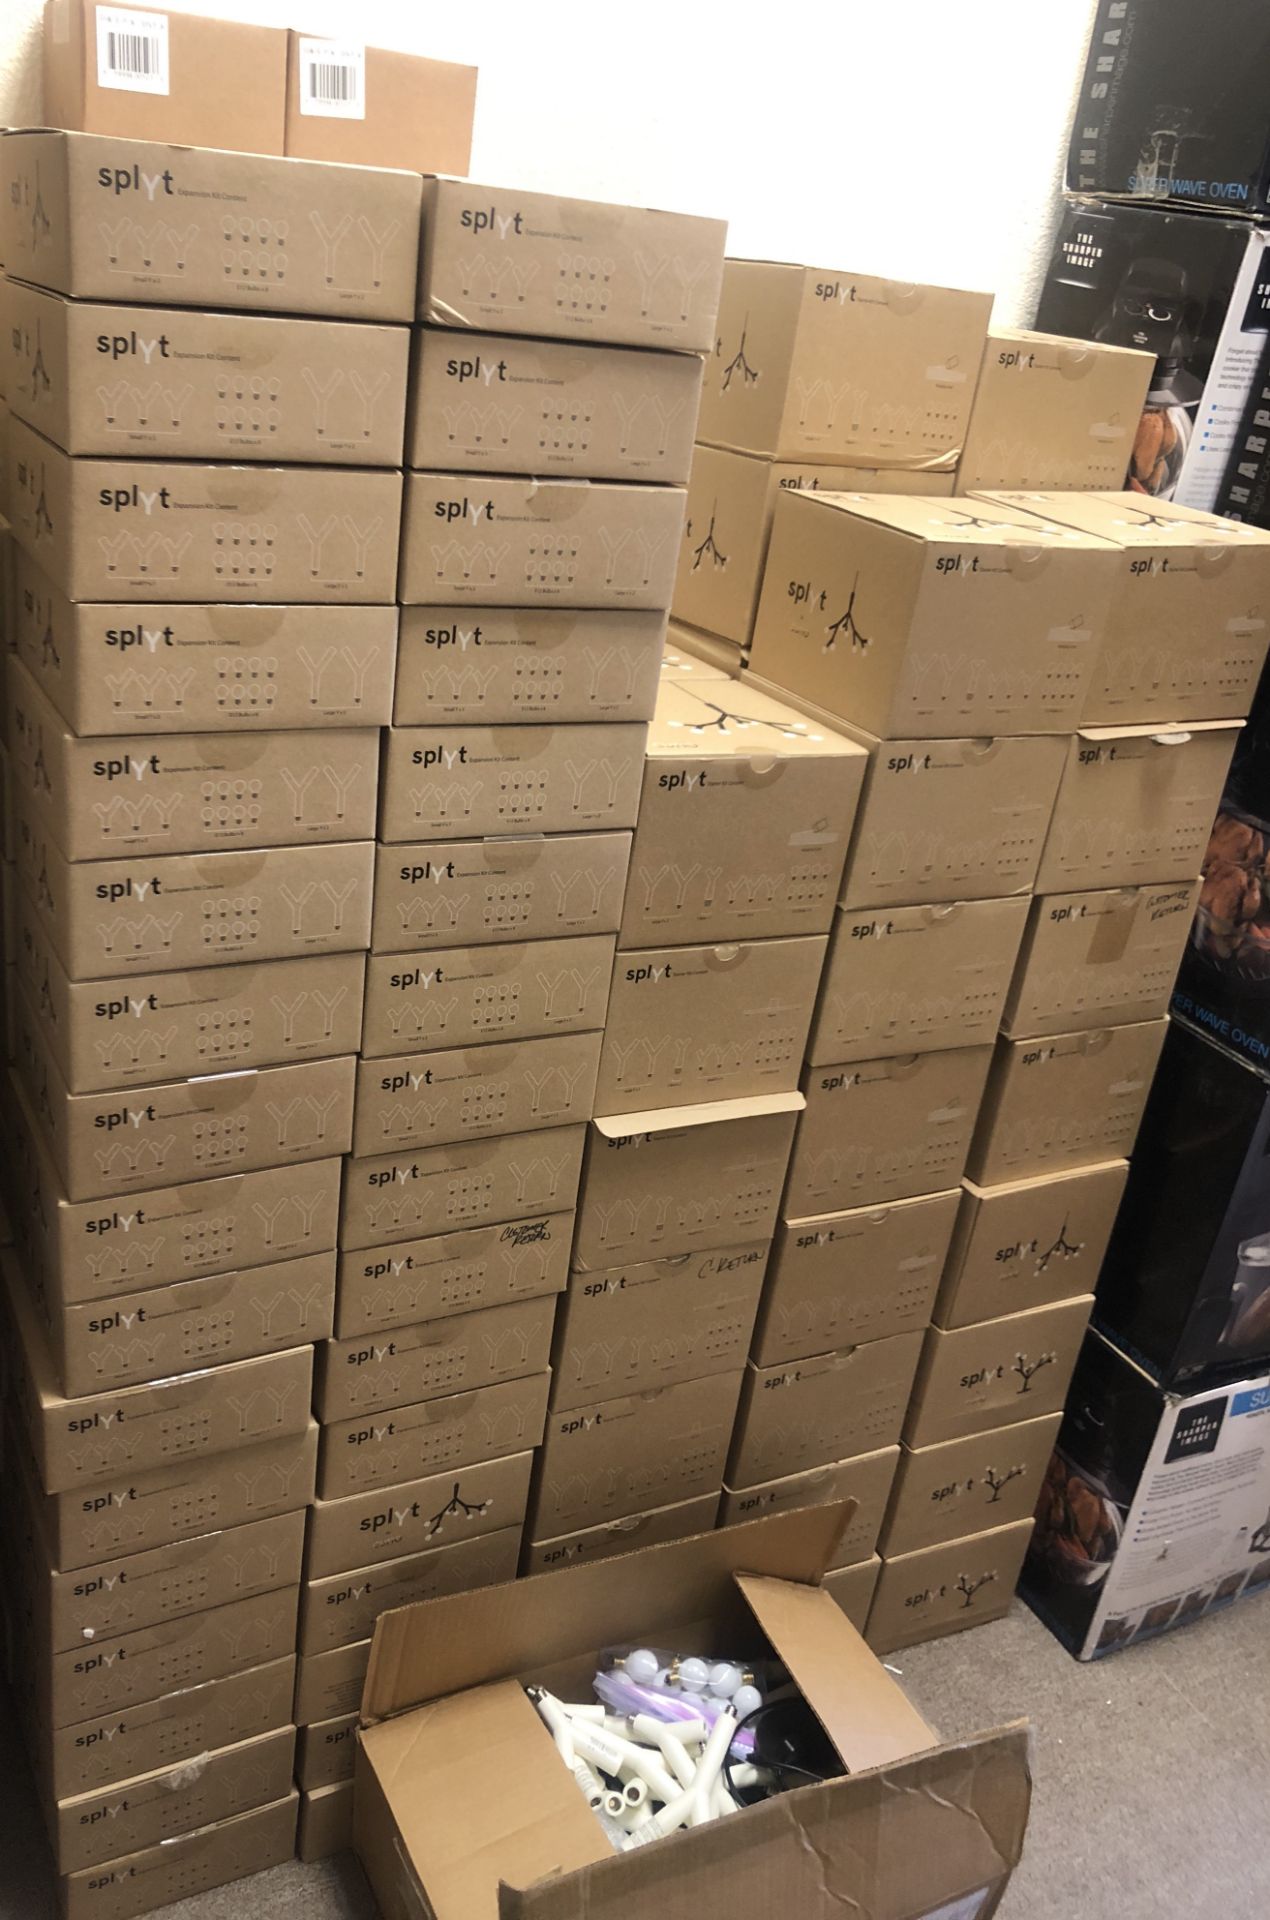 140 BOXES OF SPLYT DECORATIVE LIGHTING SYSTEMS $20,000 RETAIL VALUE PACKAGE